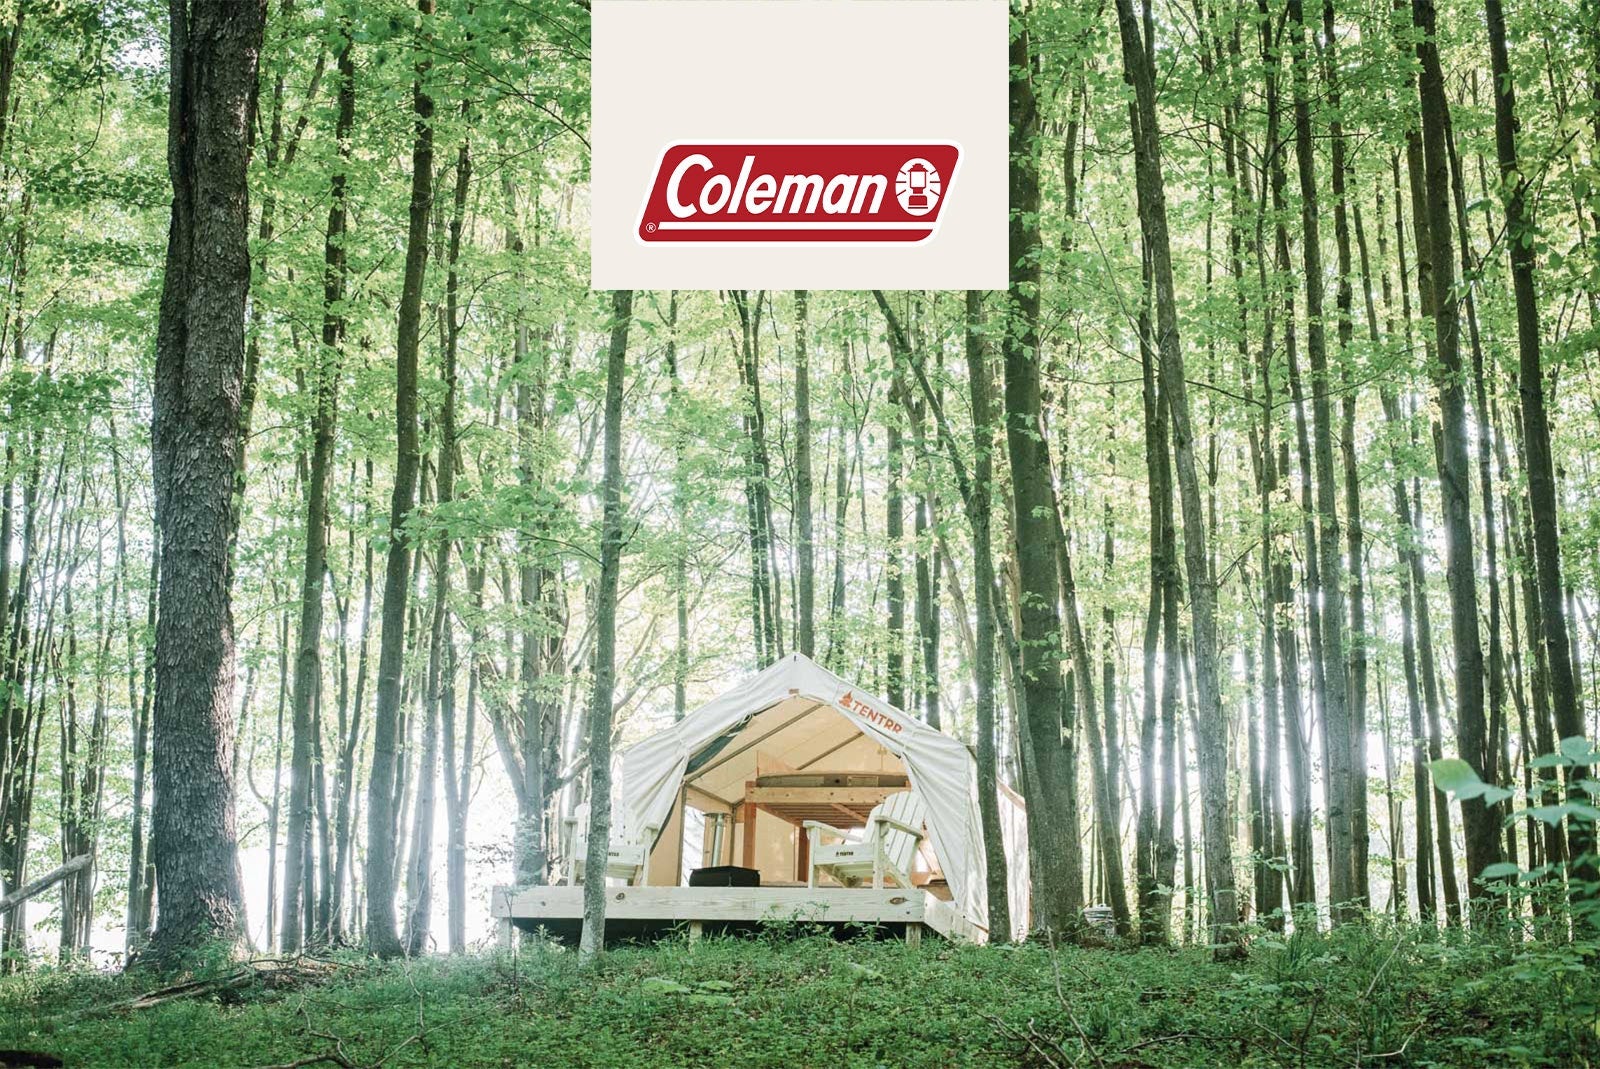 Camper submitted image from Tentrr Signature Site - Hollow Tree Camp - Coleman Outfitted Site - 1